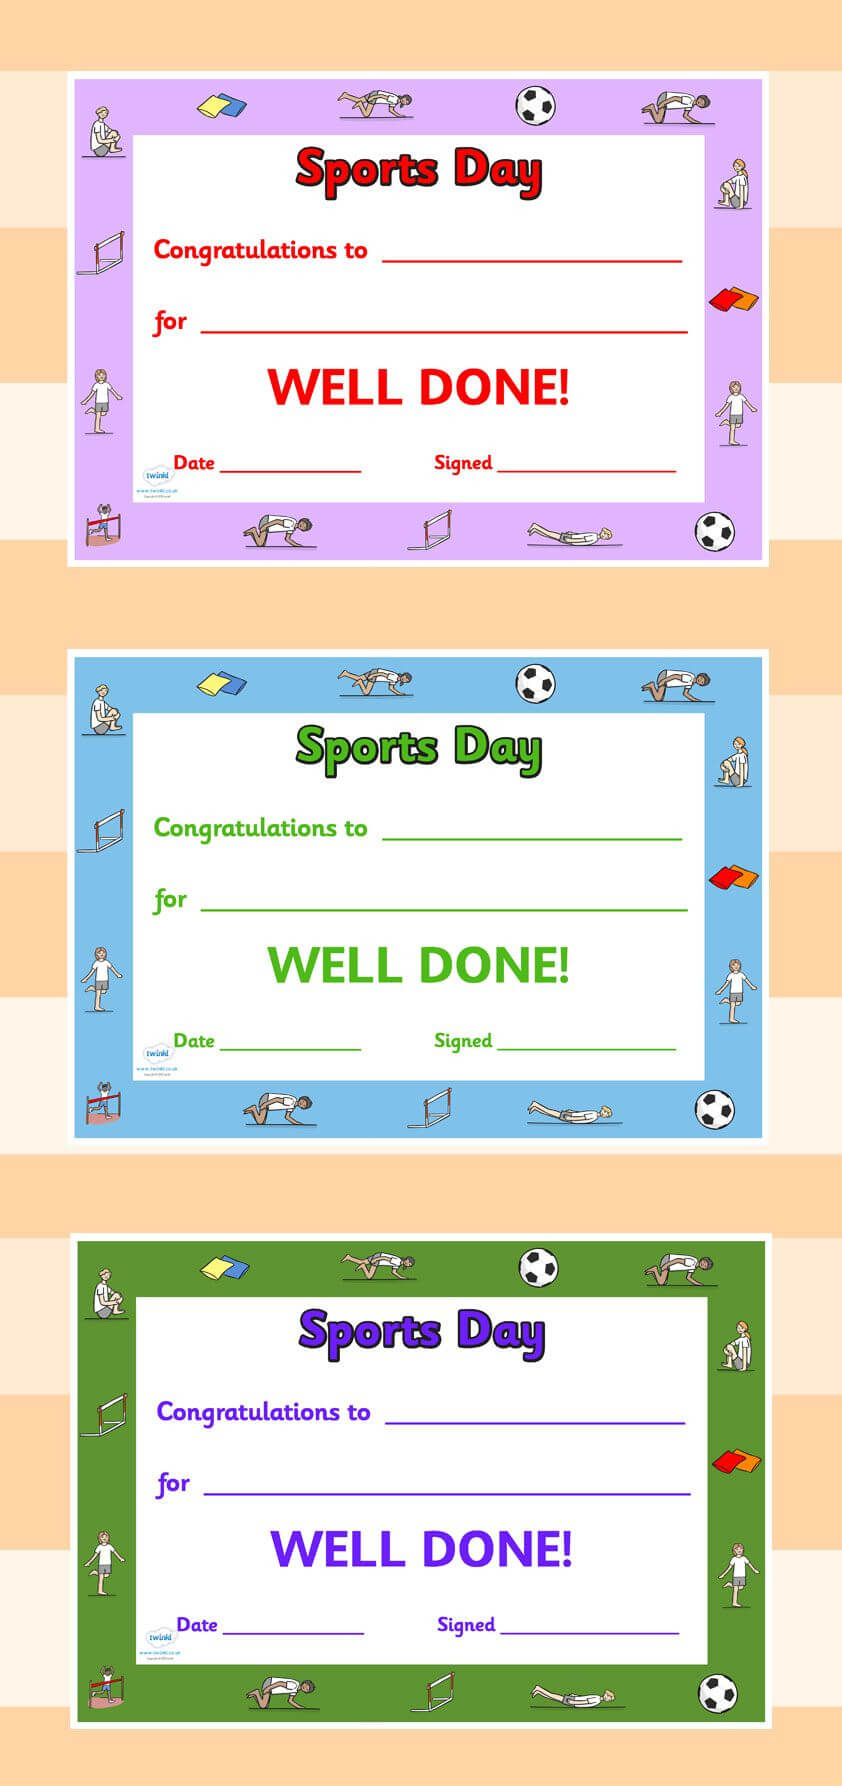 Twinkl Resources >> Editable Sports Day Award Certificates Regarding Sports Day Certificate Templates Free